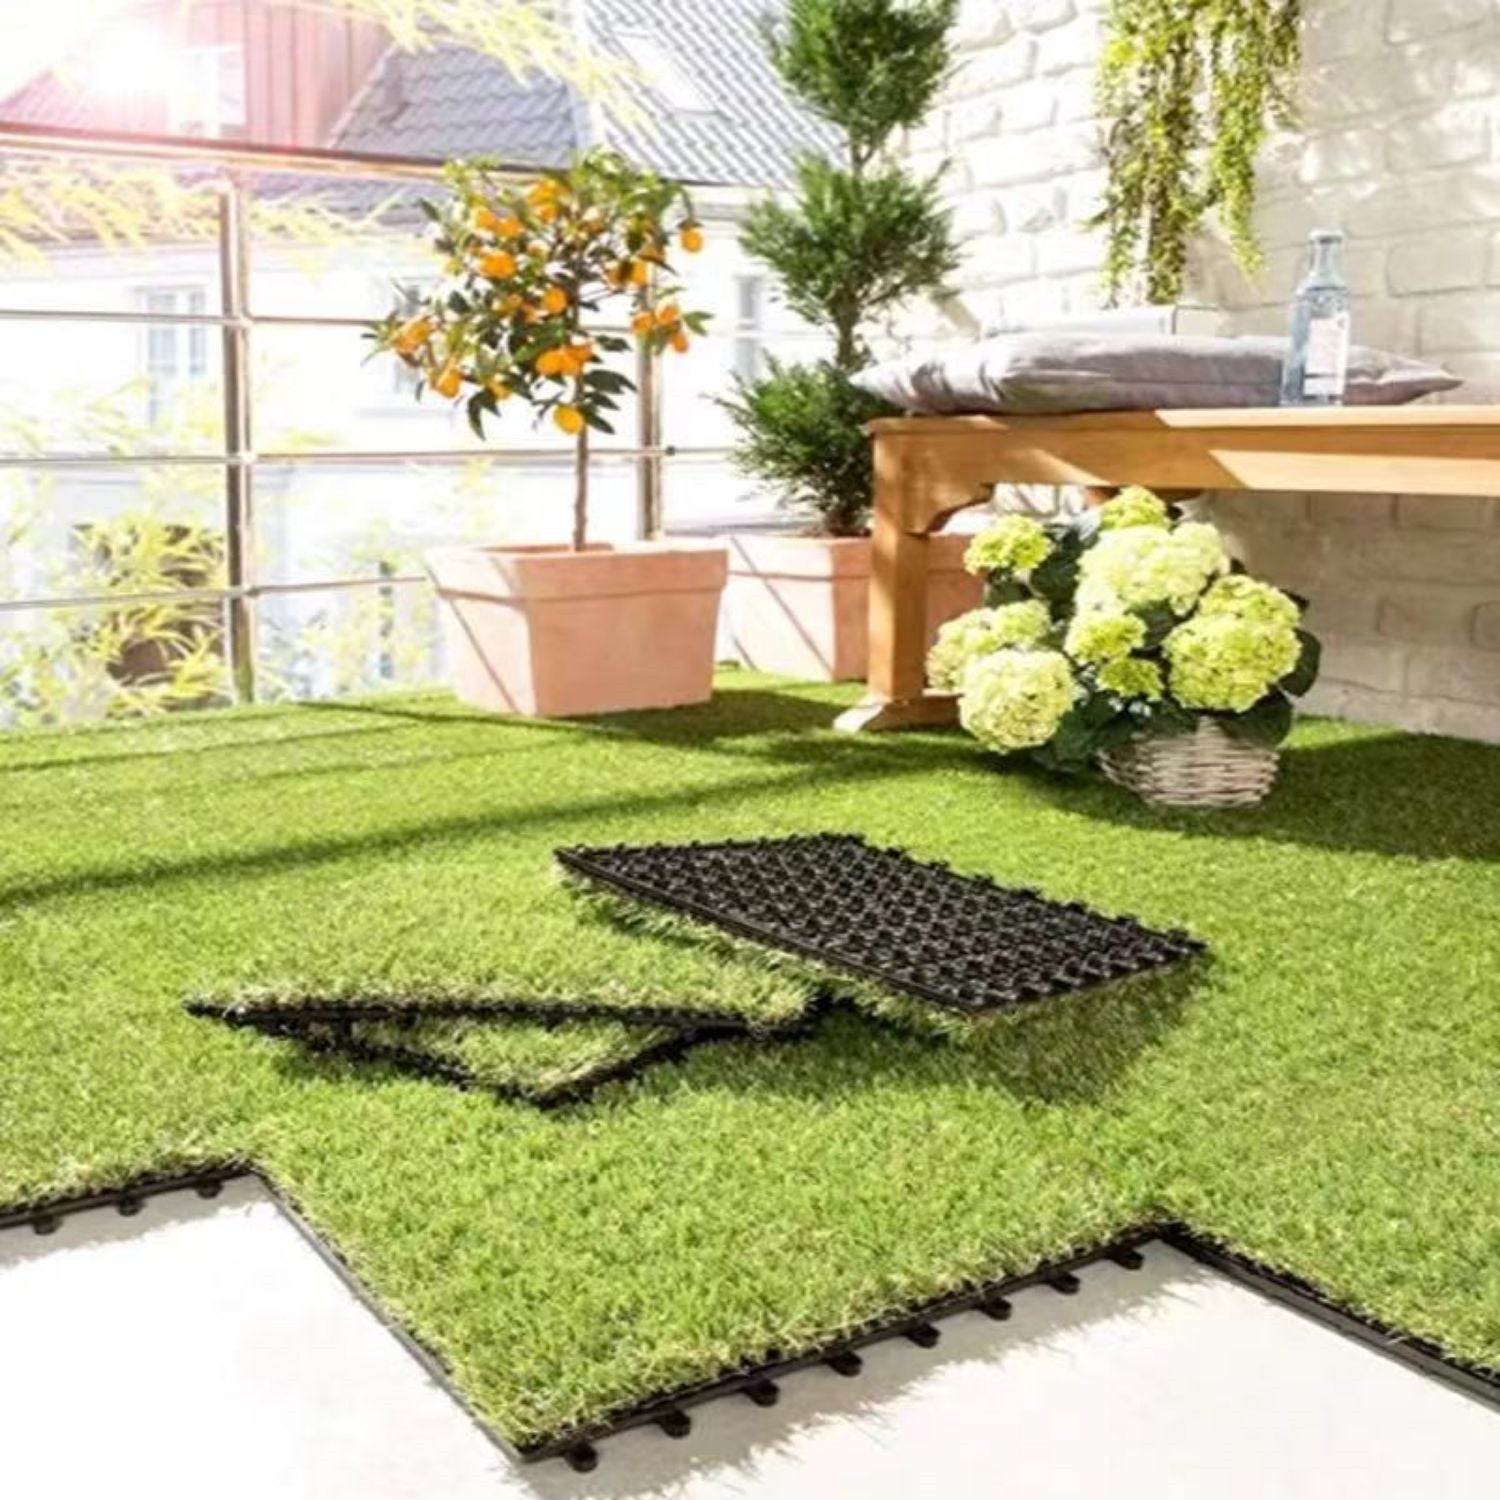 Artificial lawn carpet, perfect for pets to play on.